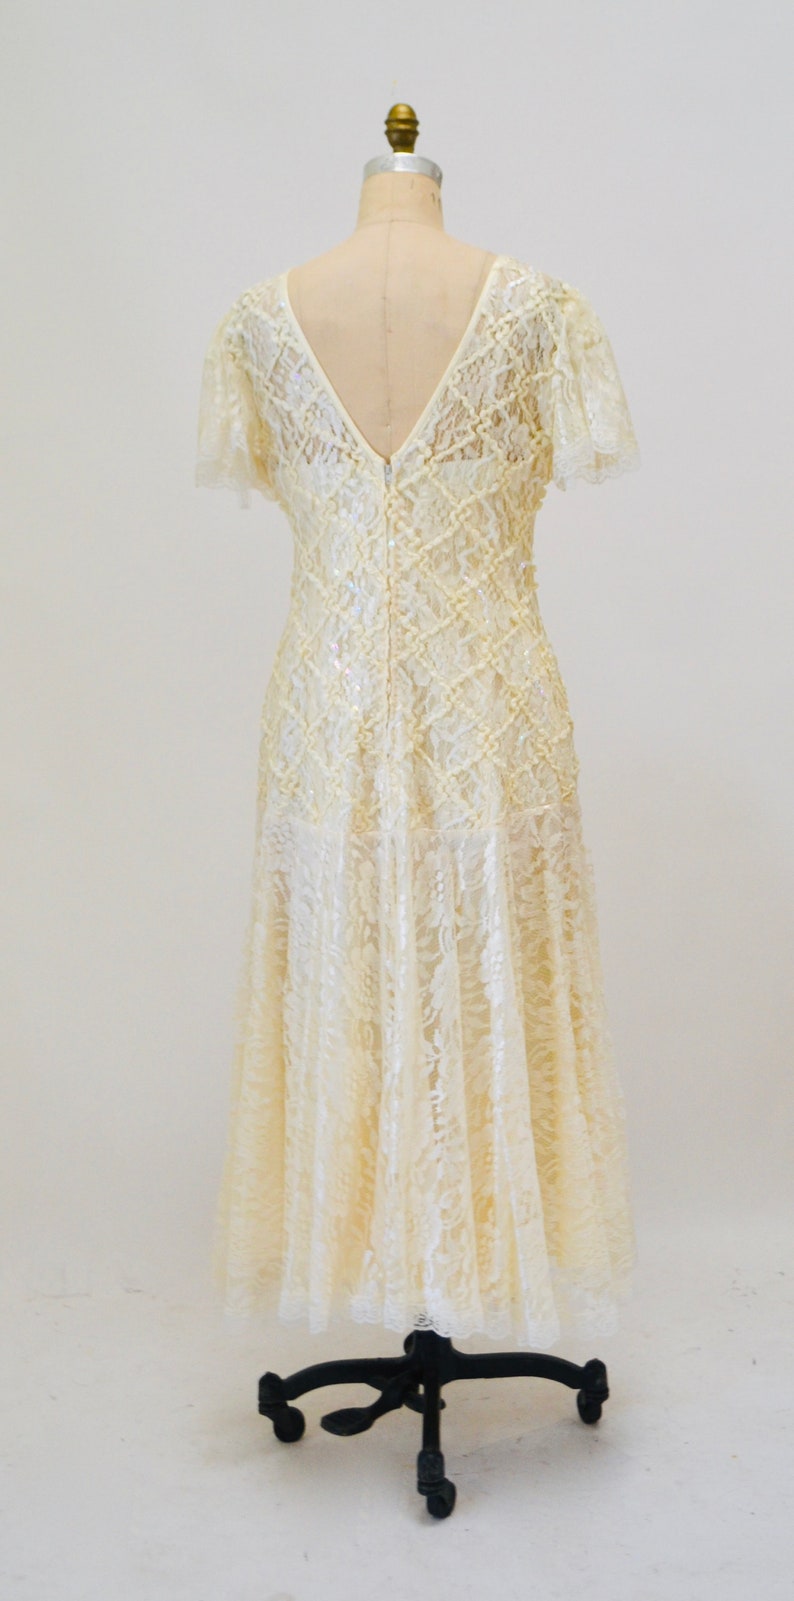 80s does 20s Vintage Lace Sequin Dress Medium Cream Off White// Vintage Sequin Lace Wedding Dress Boho Flapper Inspired Cream Lace Dress image 5